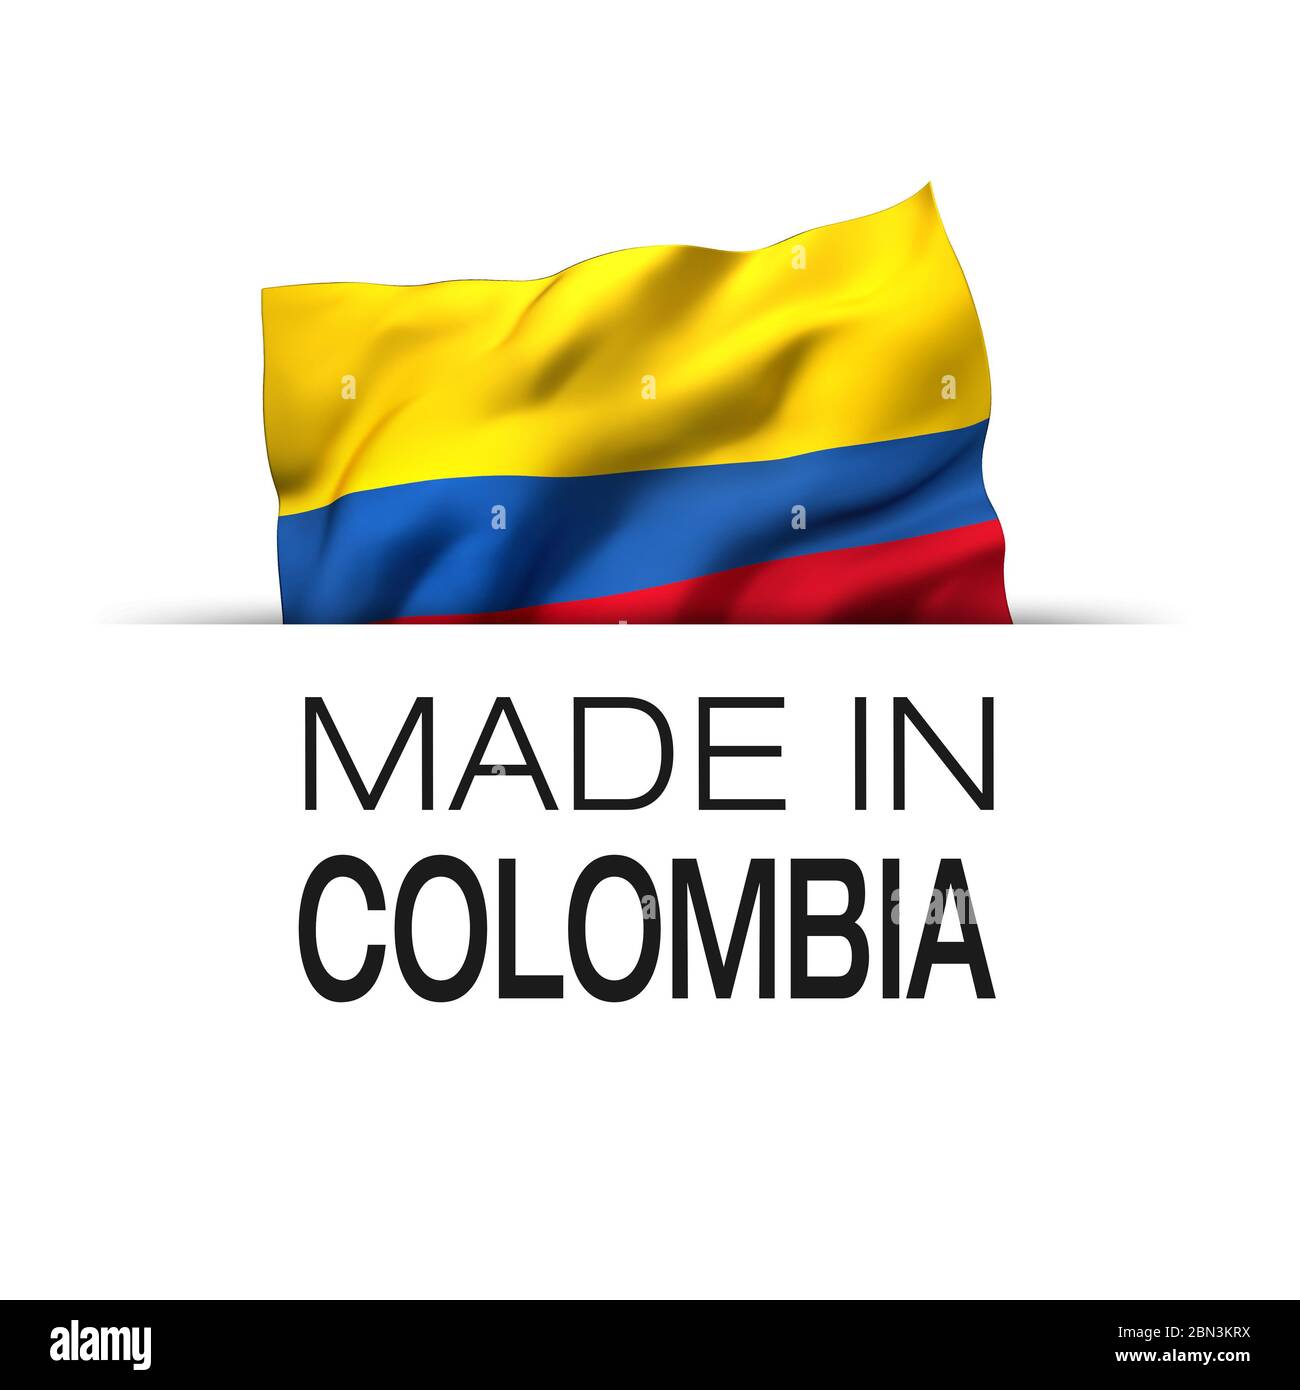 Made in Colombia - Guarantee label with a waving Colombian flag. 3D illustration. Stock Photo